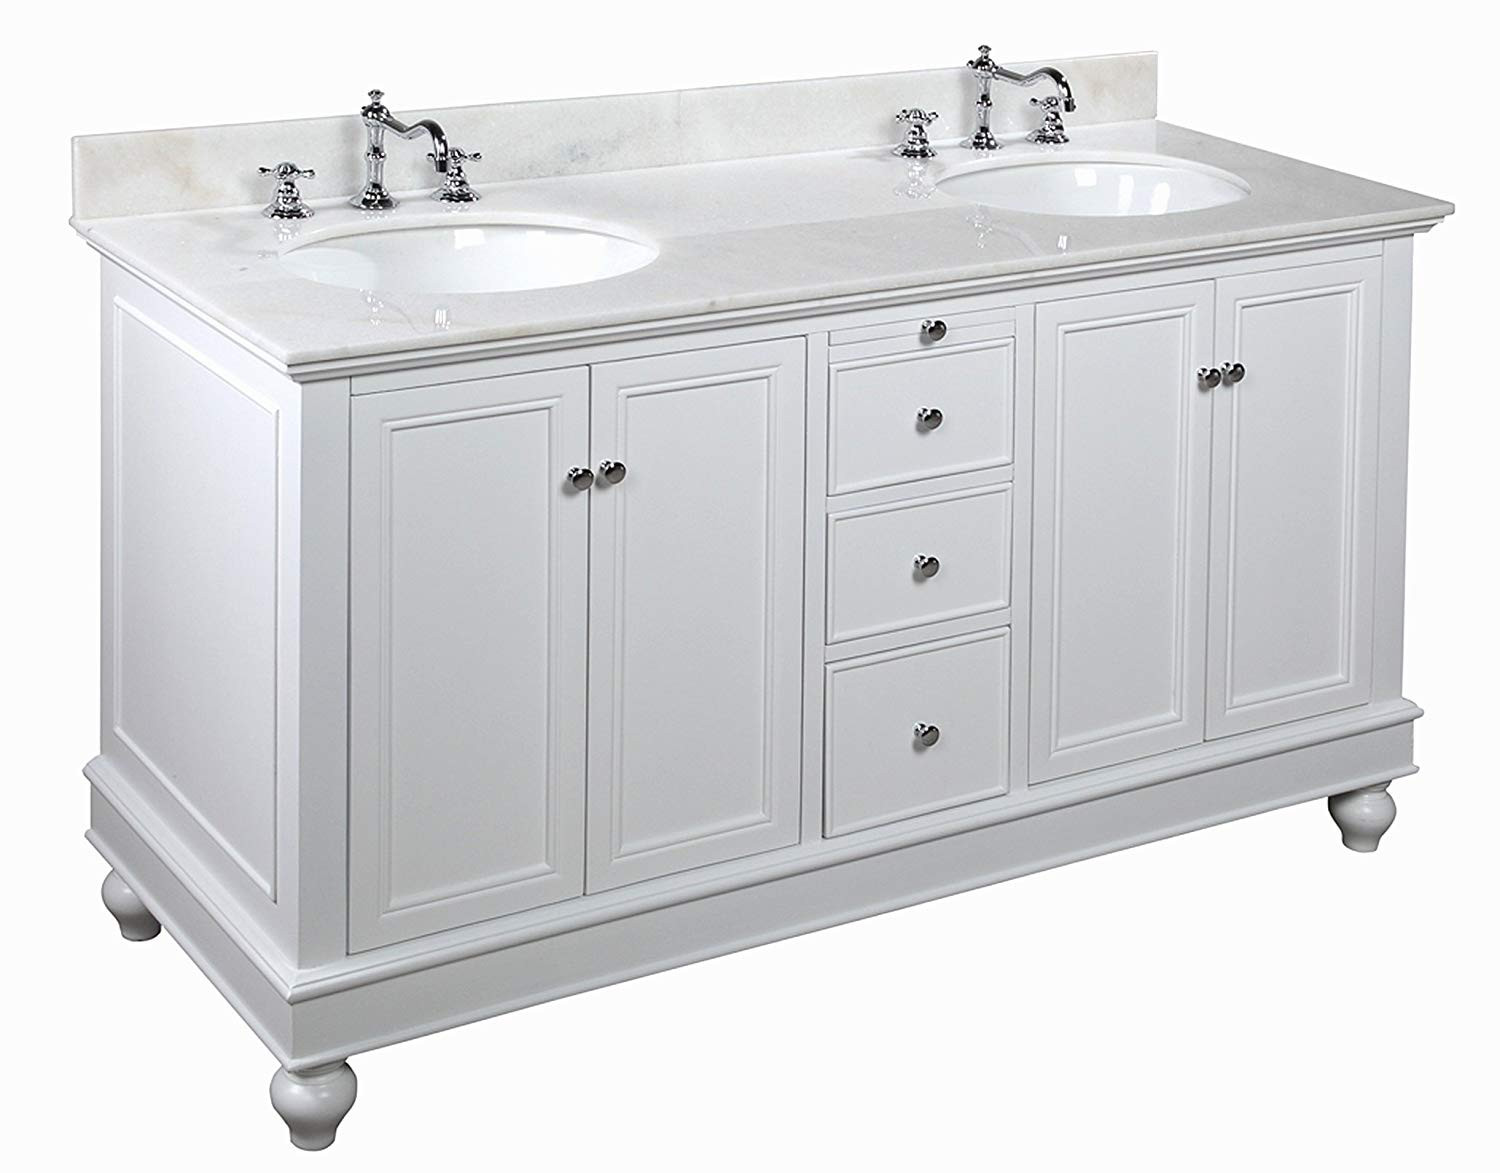 Cost To Install Bathroom Vanity
 low cost Kitchen Bath Collection KBC222WTWT Bella Double